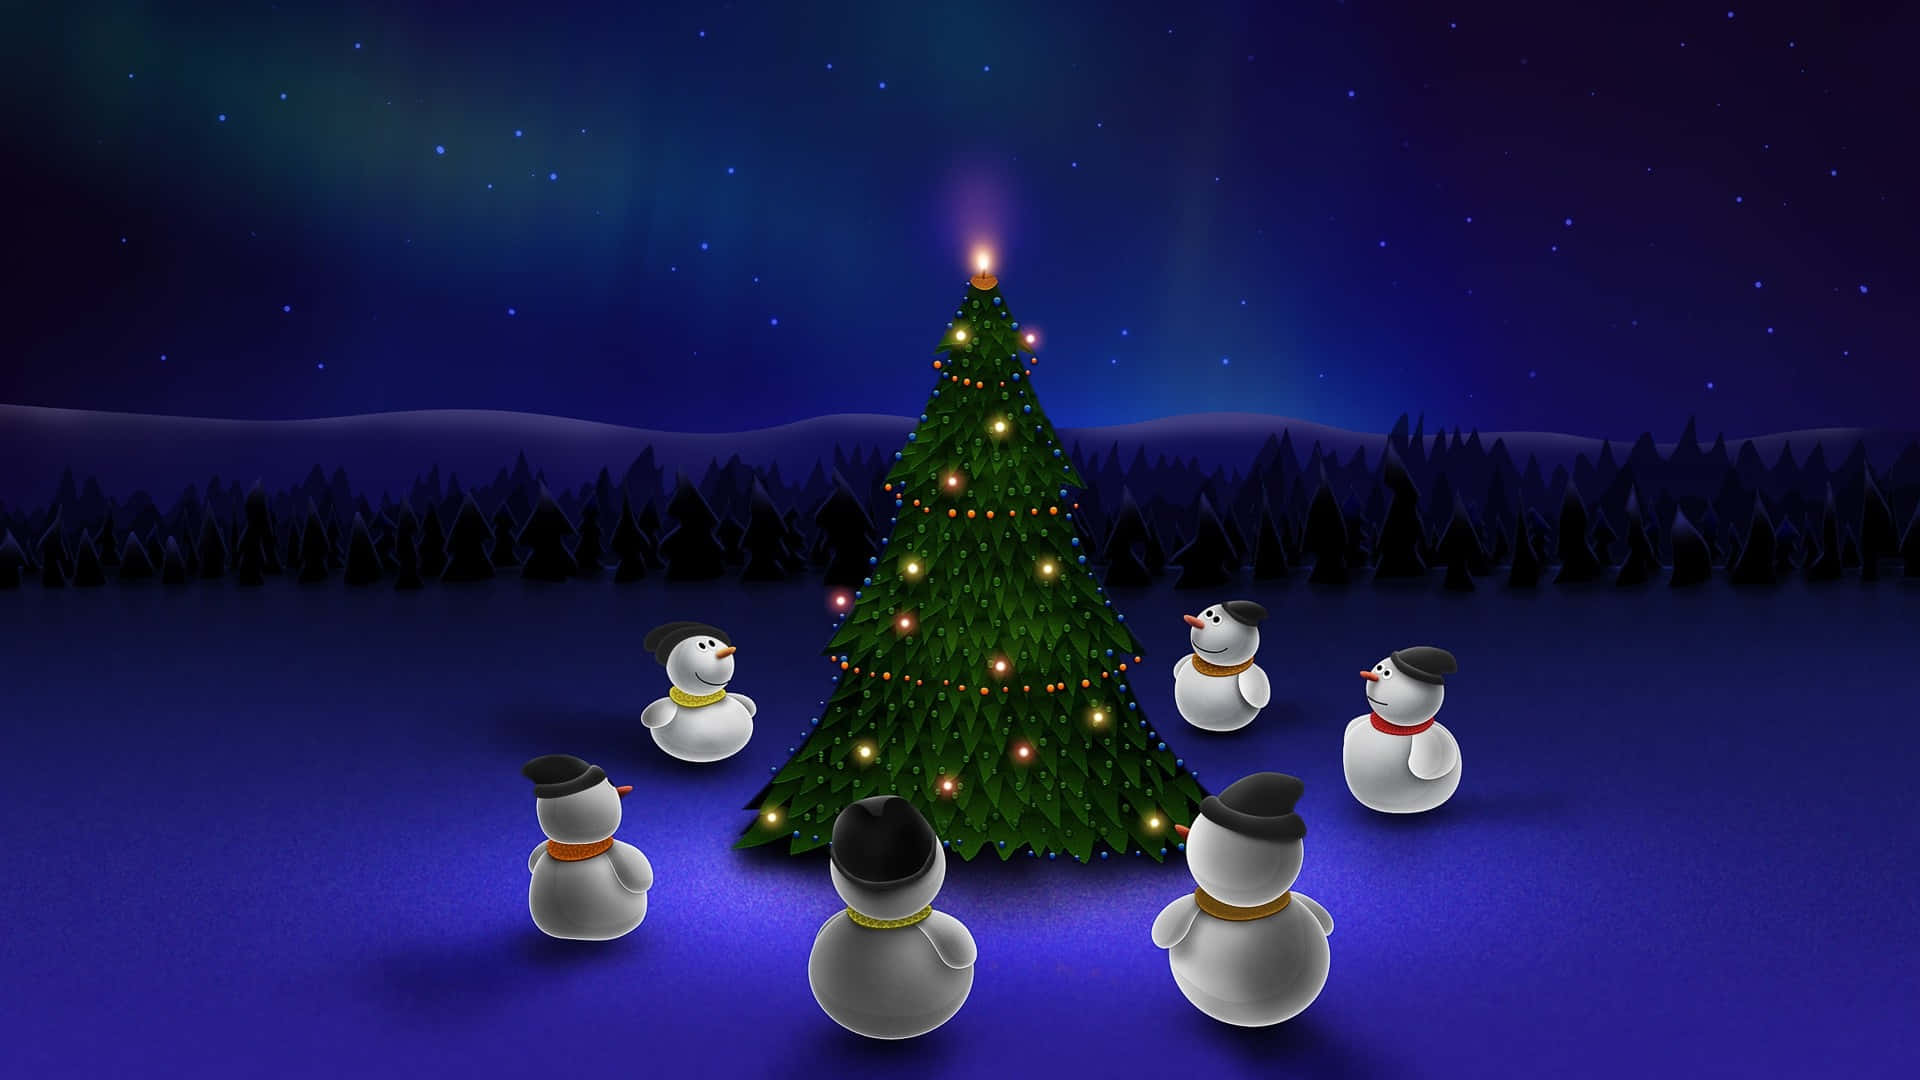 Free Christmas Tree Snowman Picture